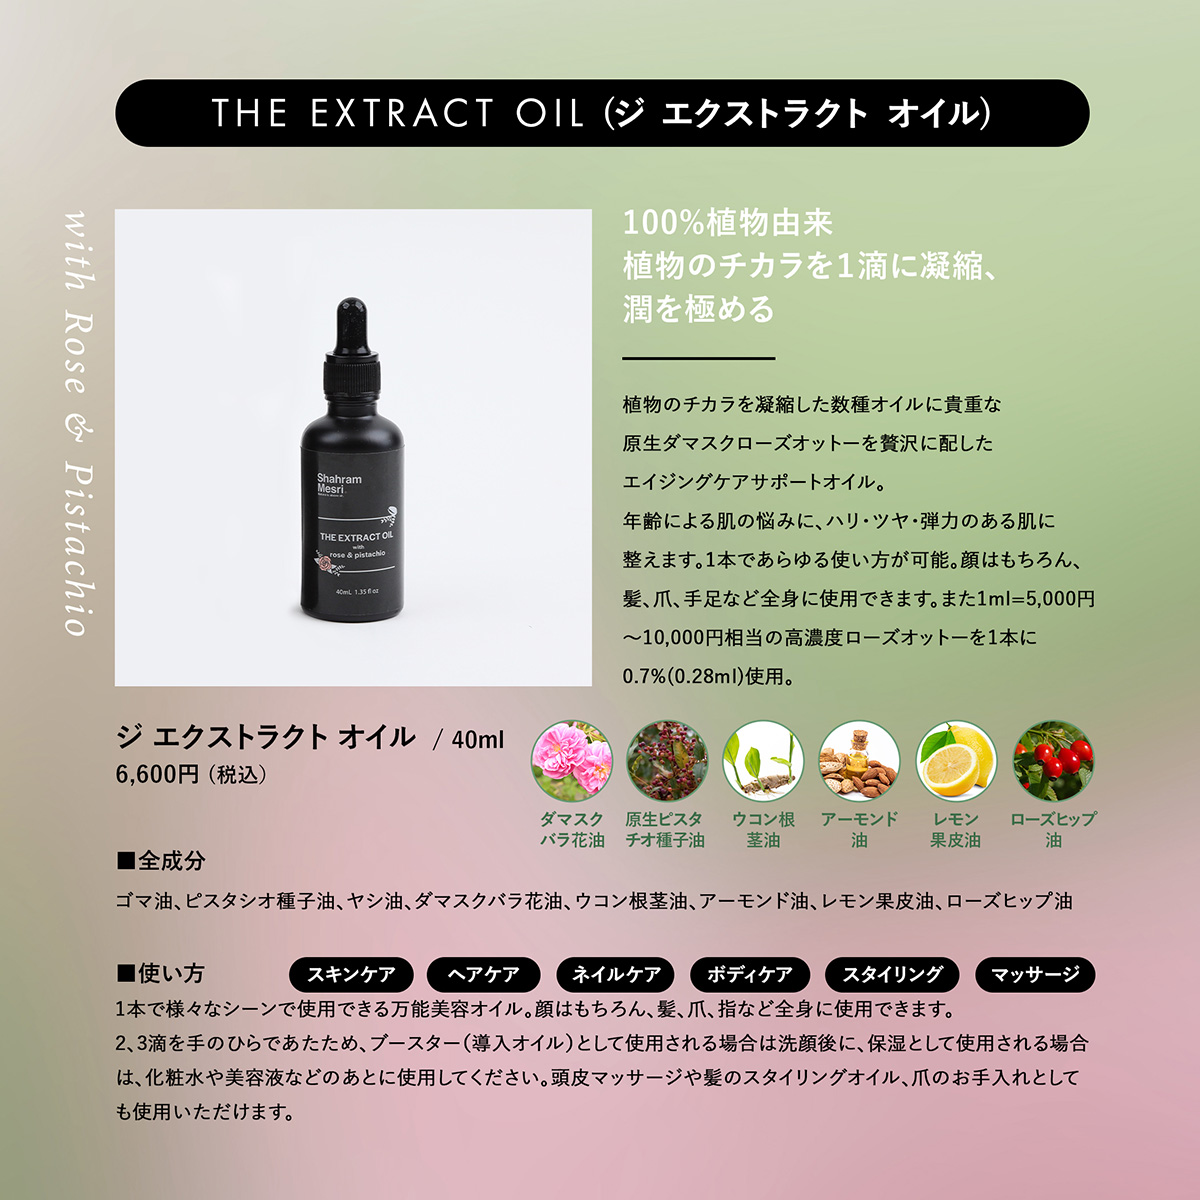 THE EXTRACT OIL